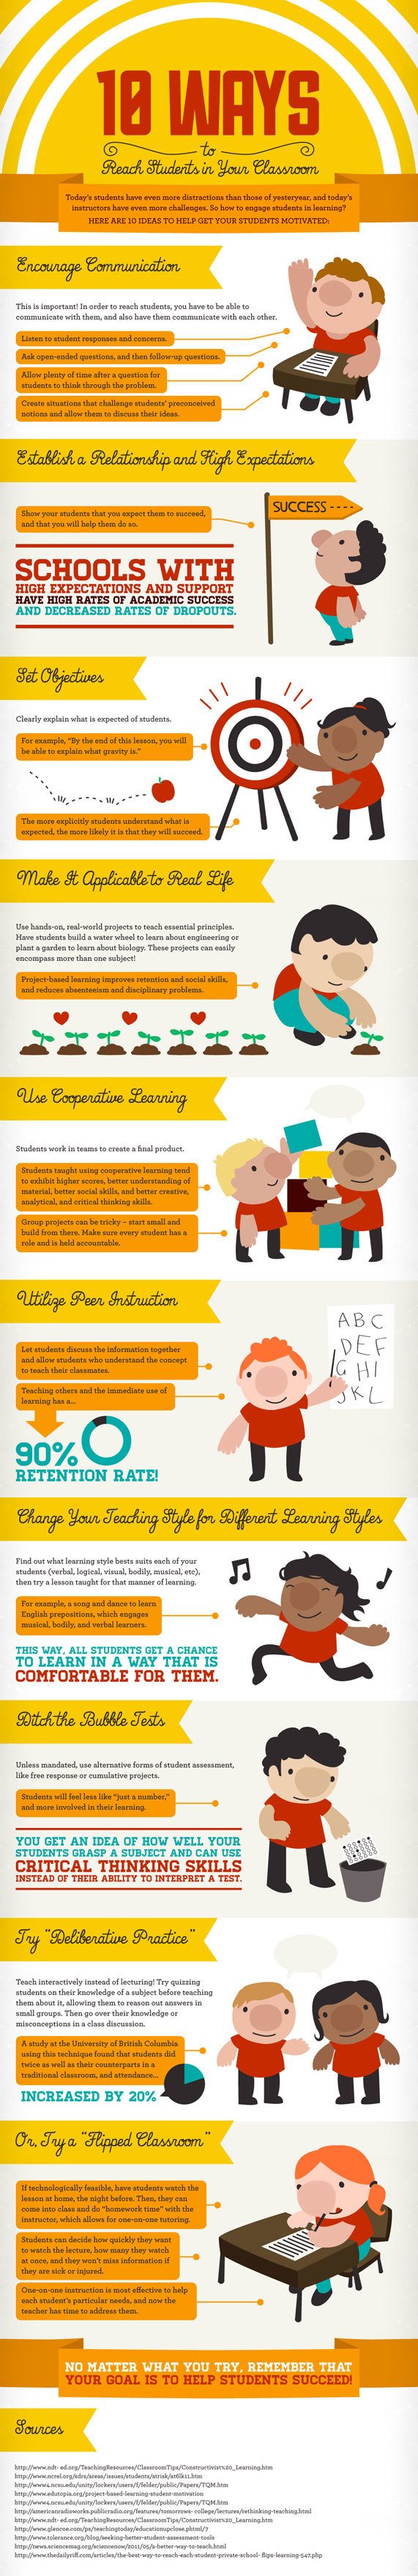 How to Motivate Your Students in the Classroom Infographic